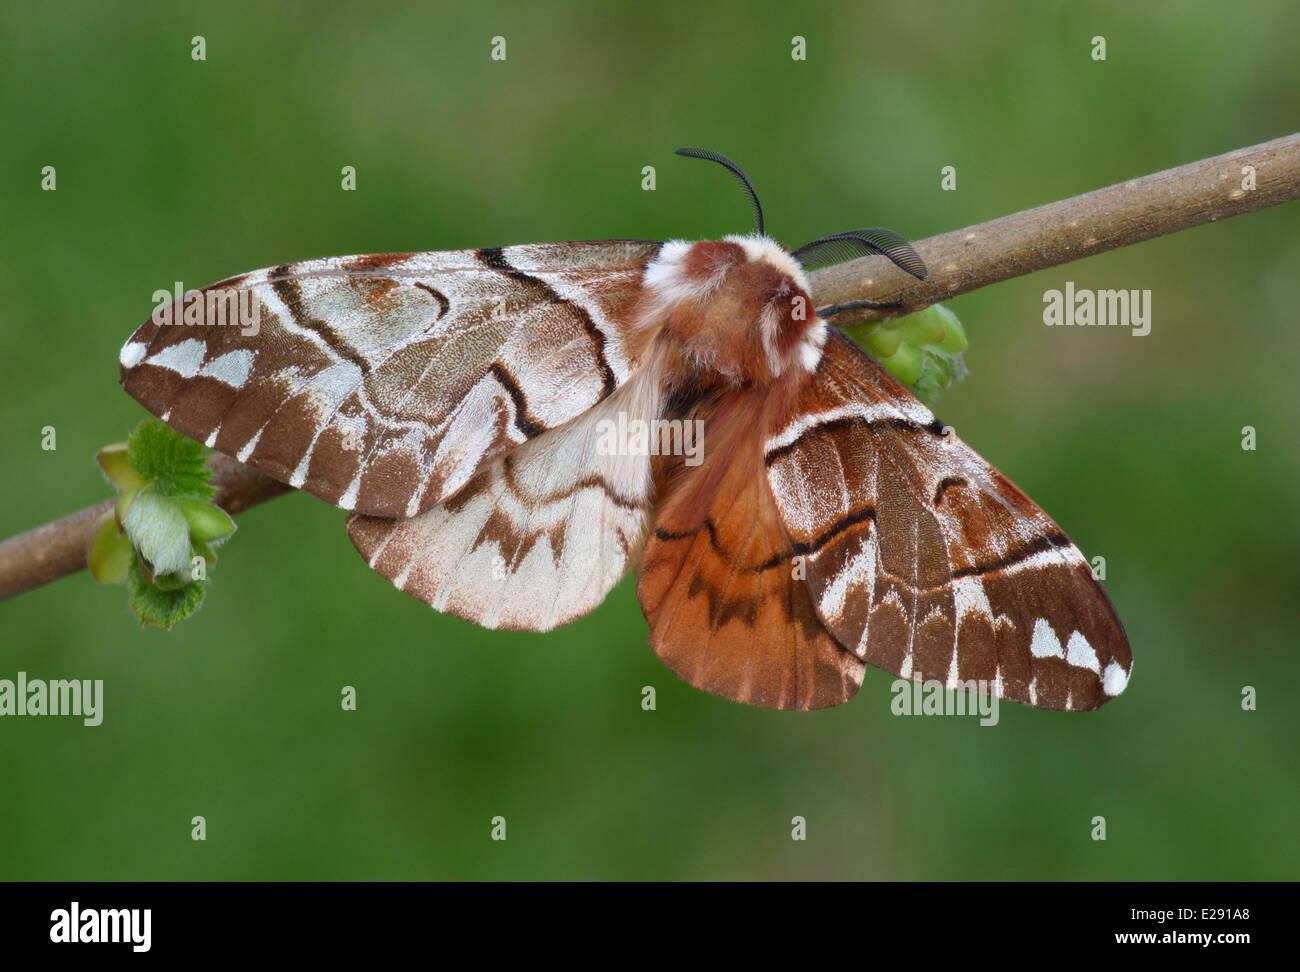 Kentish Glory Moth (Endromis versicolora) adult, showing gynandromorphic phenotype, left side is 'female' and right side is 'male', Cannobina Valley, Piedmont, North Italy, April Stock Photo